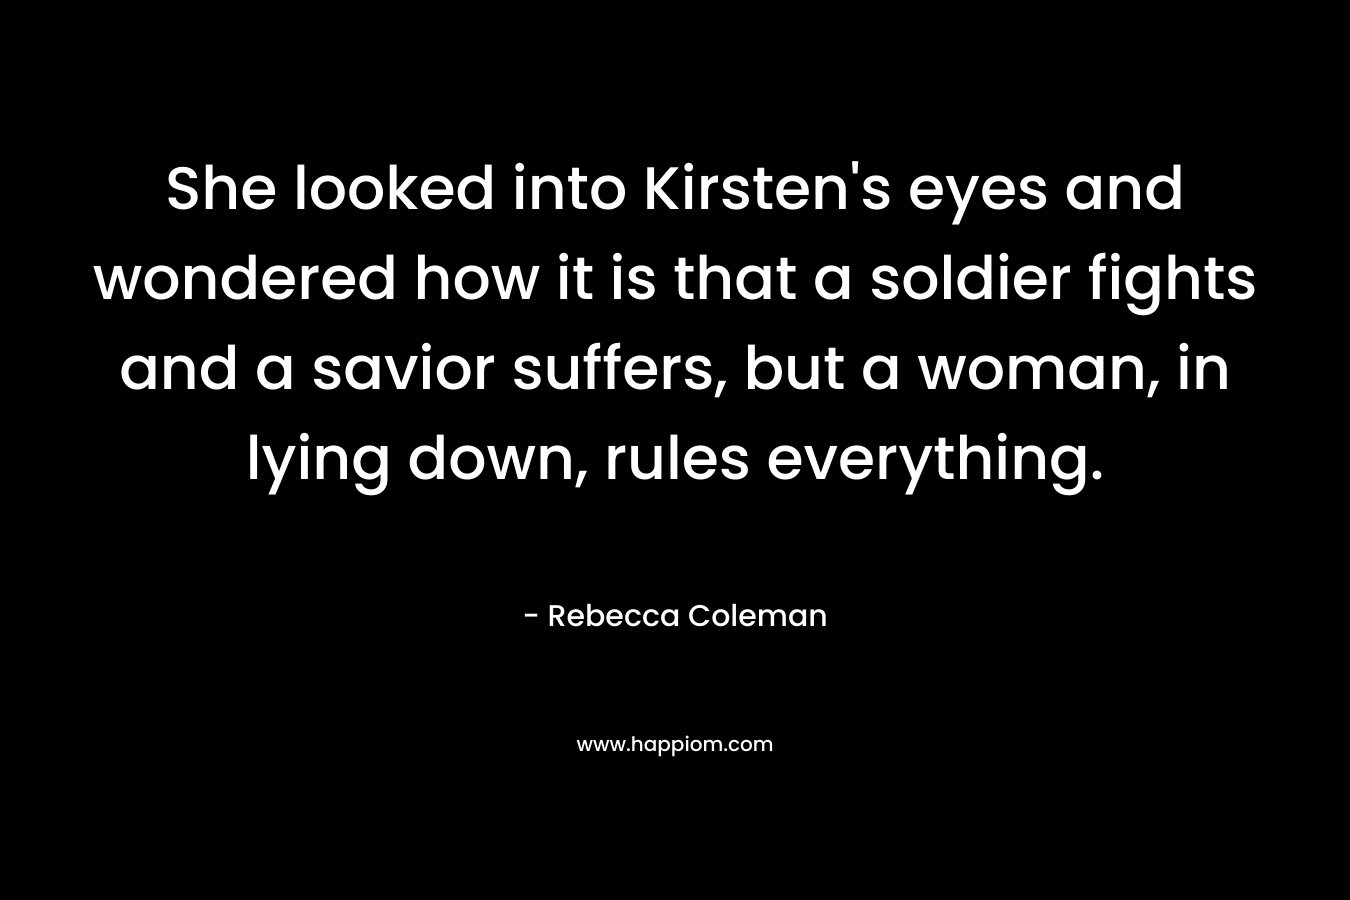 She looked into Kirsten's eyes and wondered how it is that a soldier fights and a savior suffers, but a woman, in lying down, rules everything.